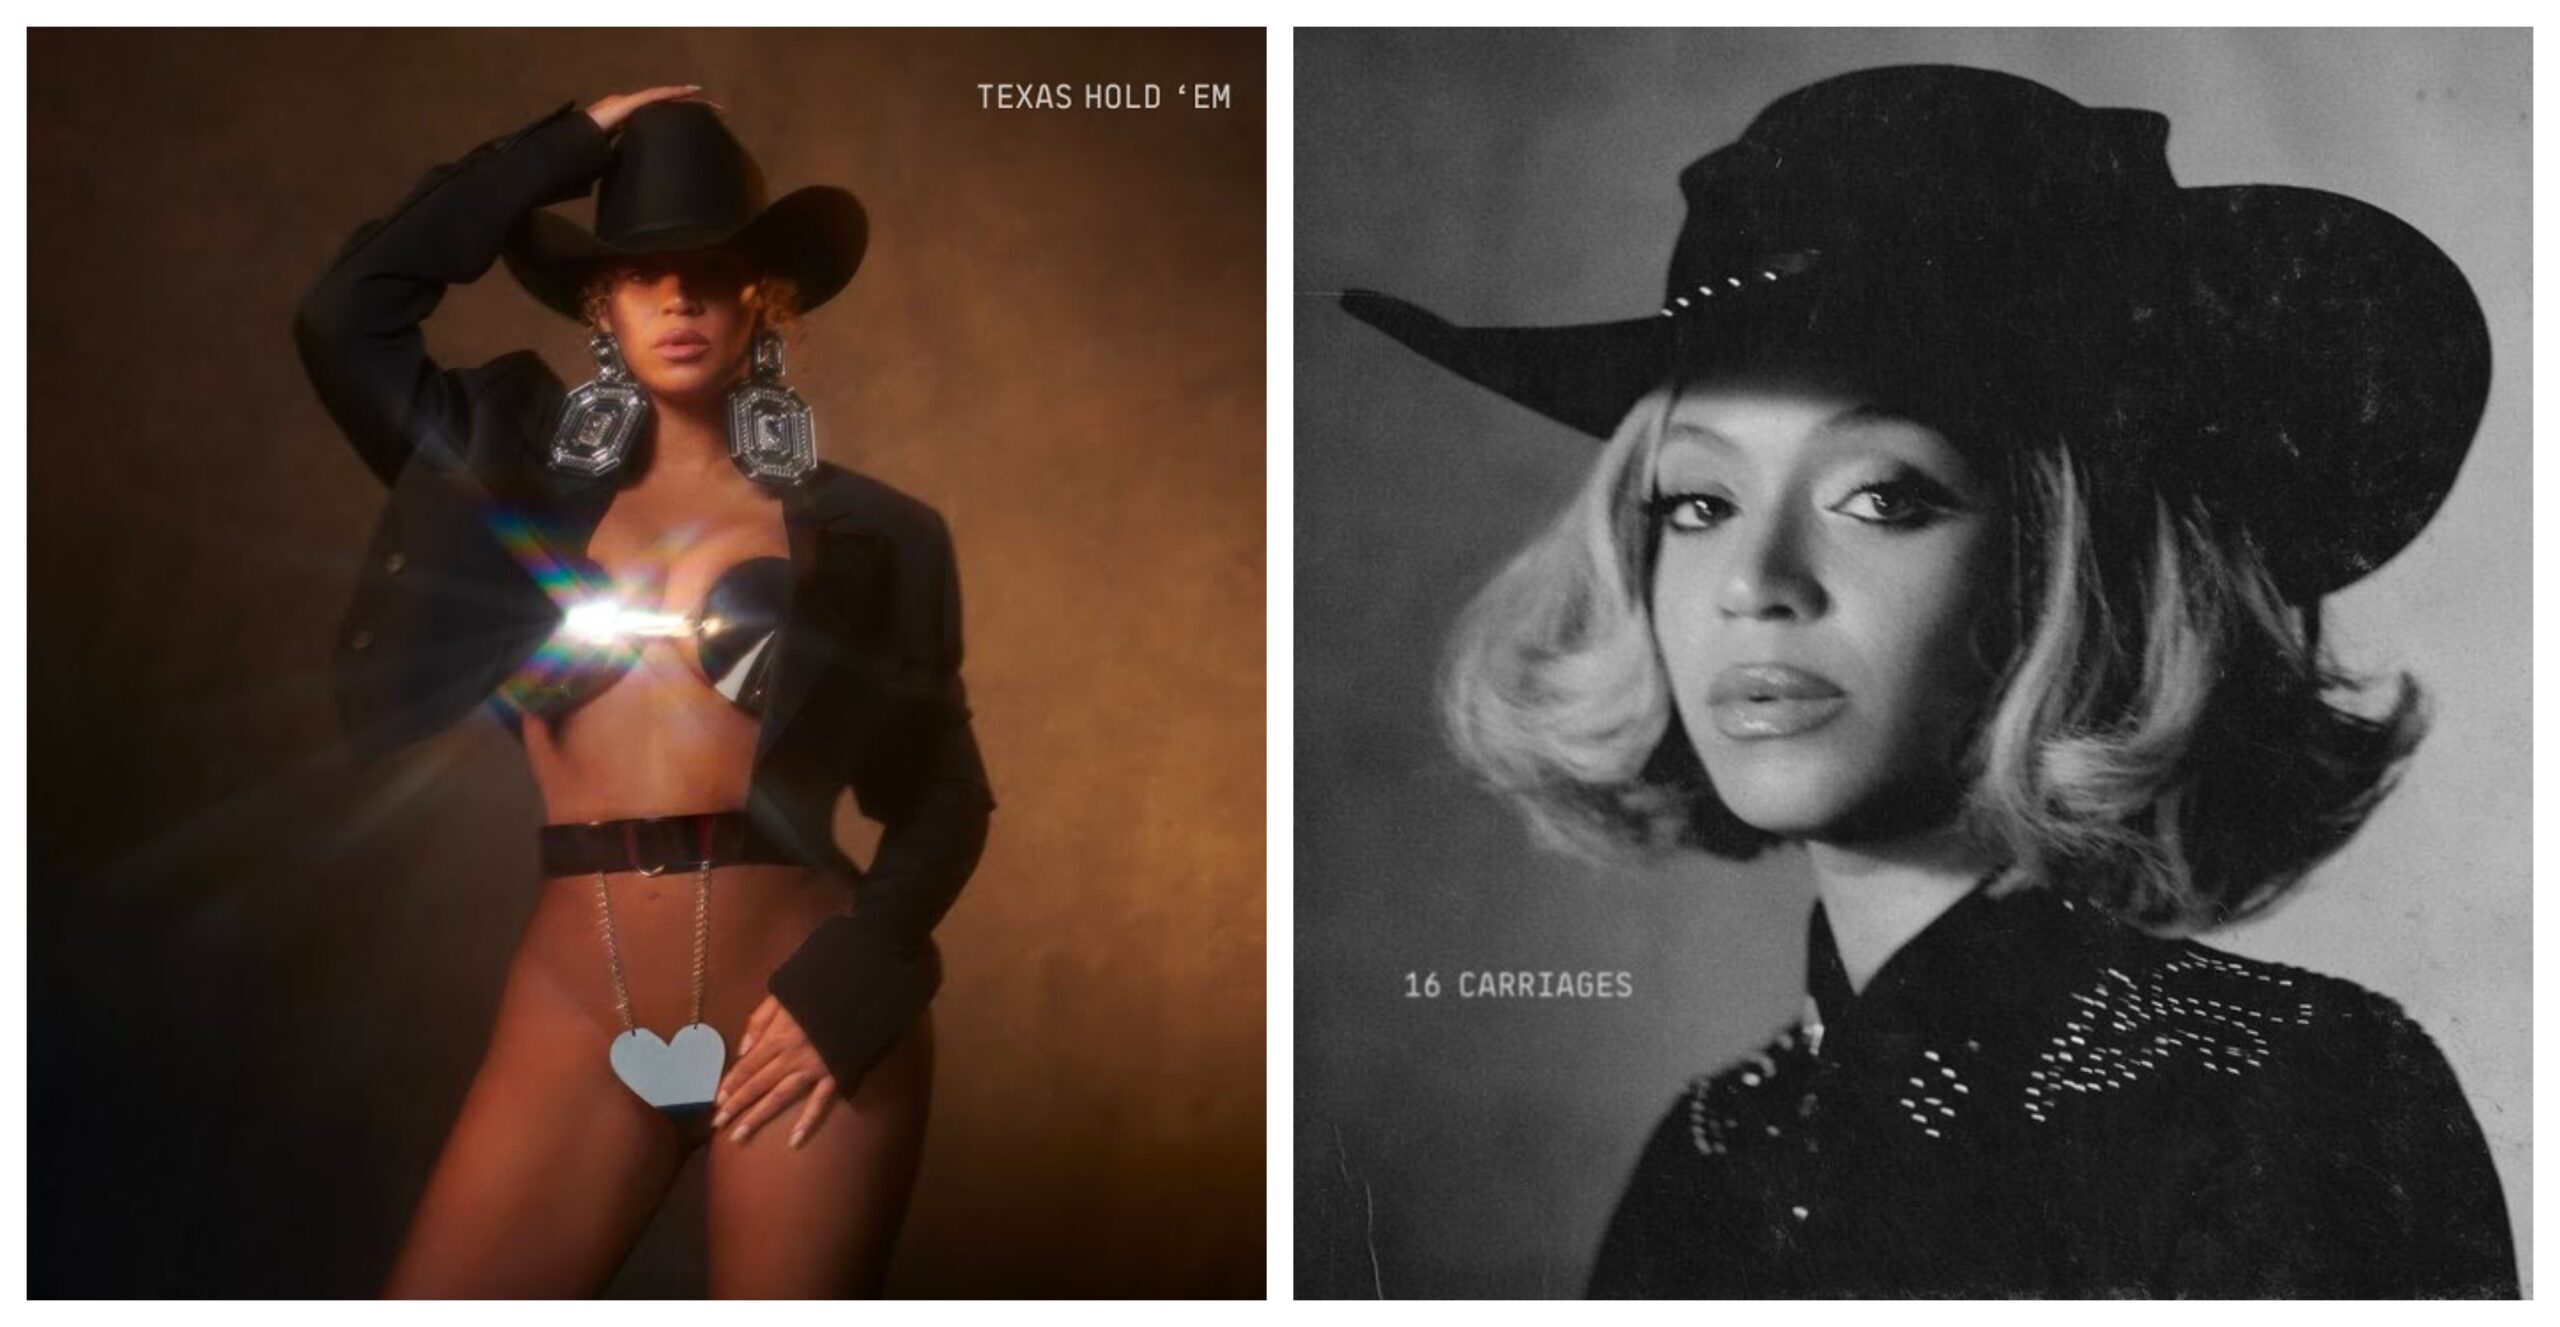 Beyoncé is Officially Sending Her New Song, 'Texas Hold 'Em', to